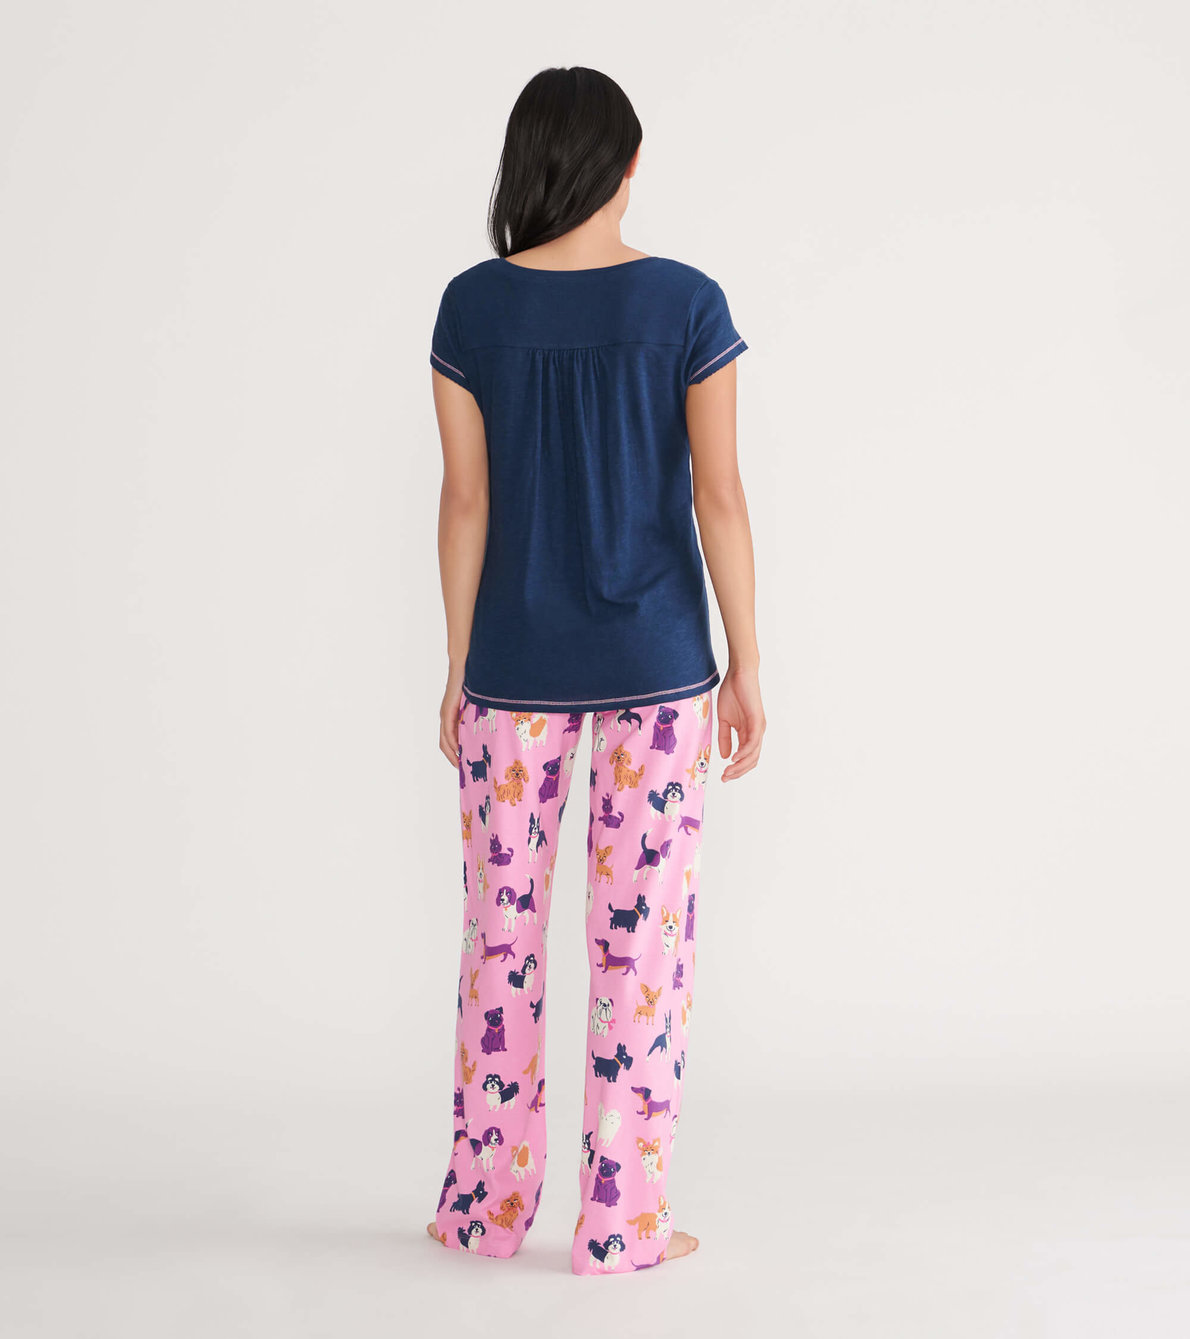 View larger image of Cheerful Dogs Women's Tee and Pants Pajama Separates